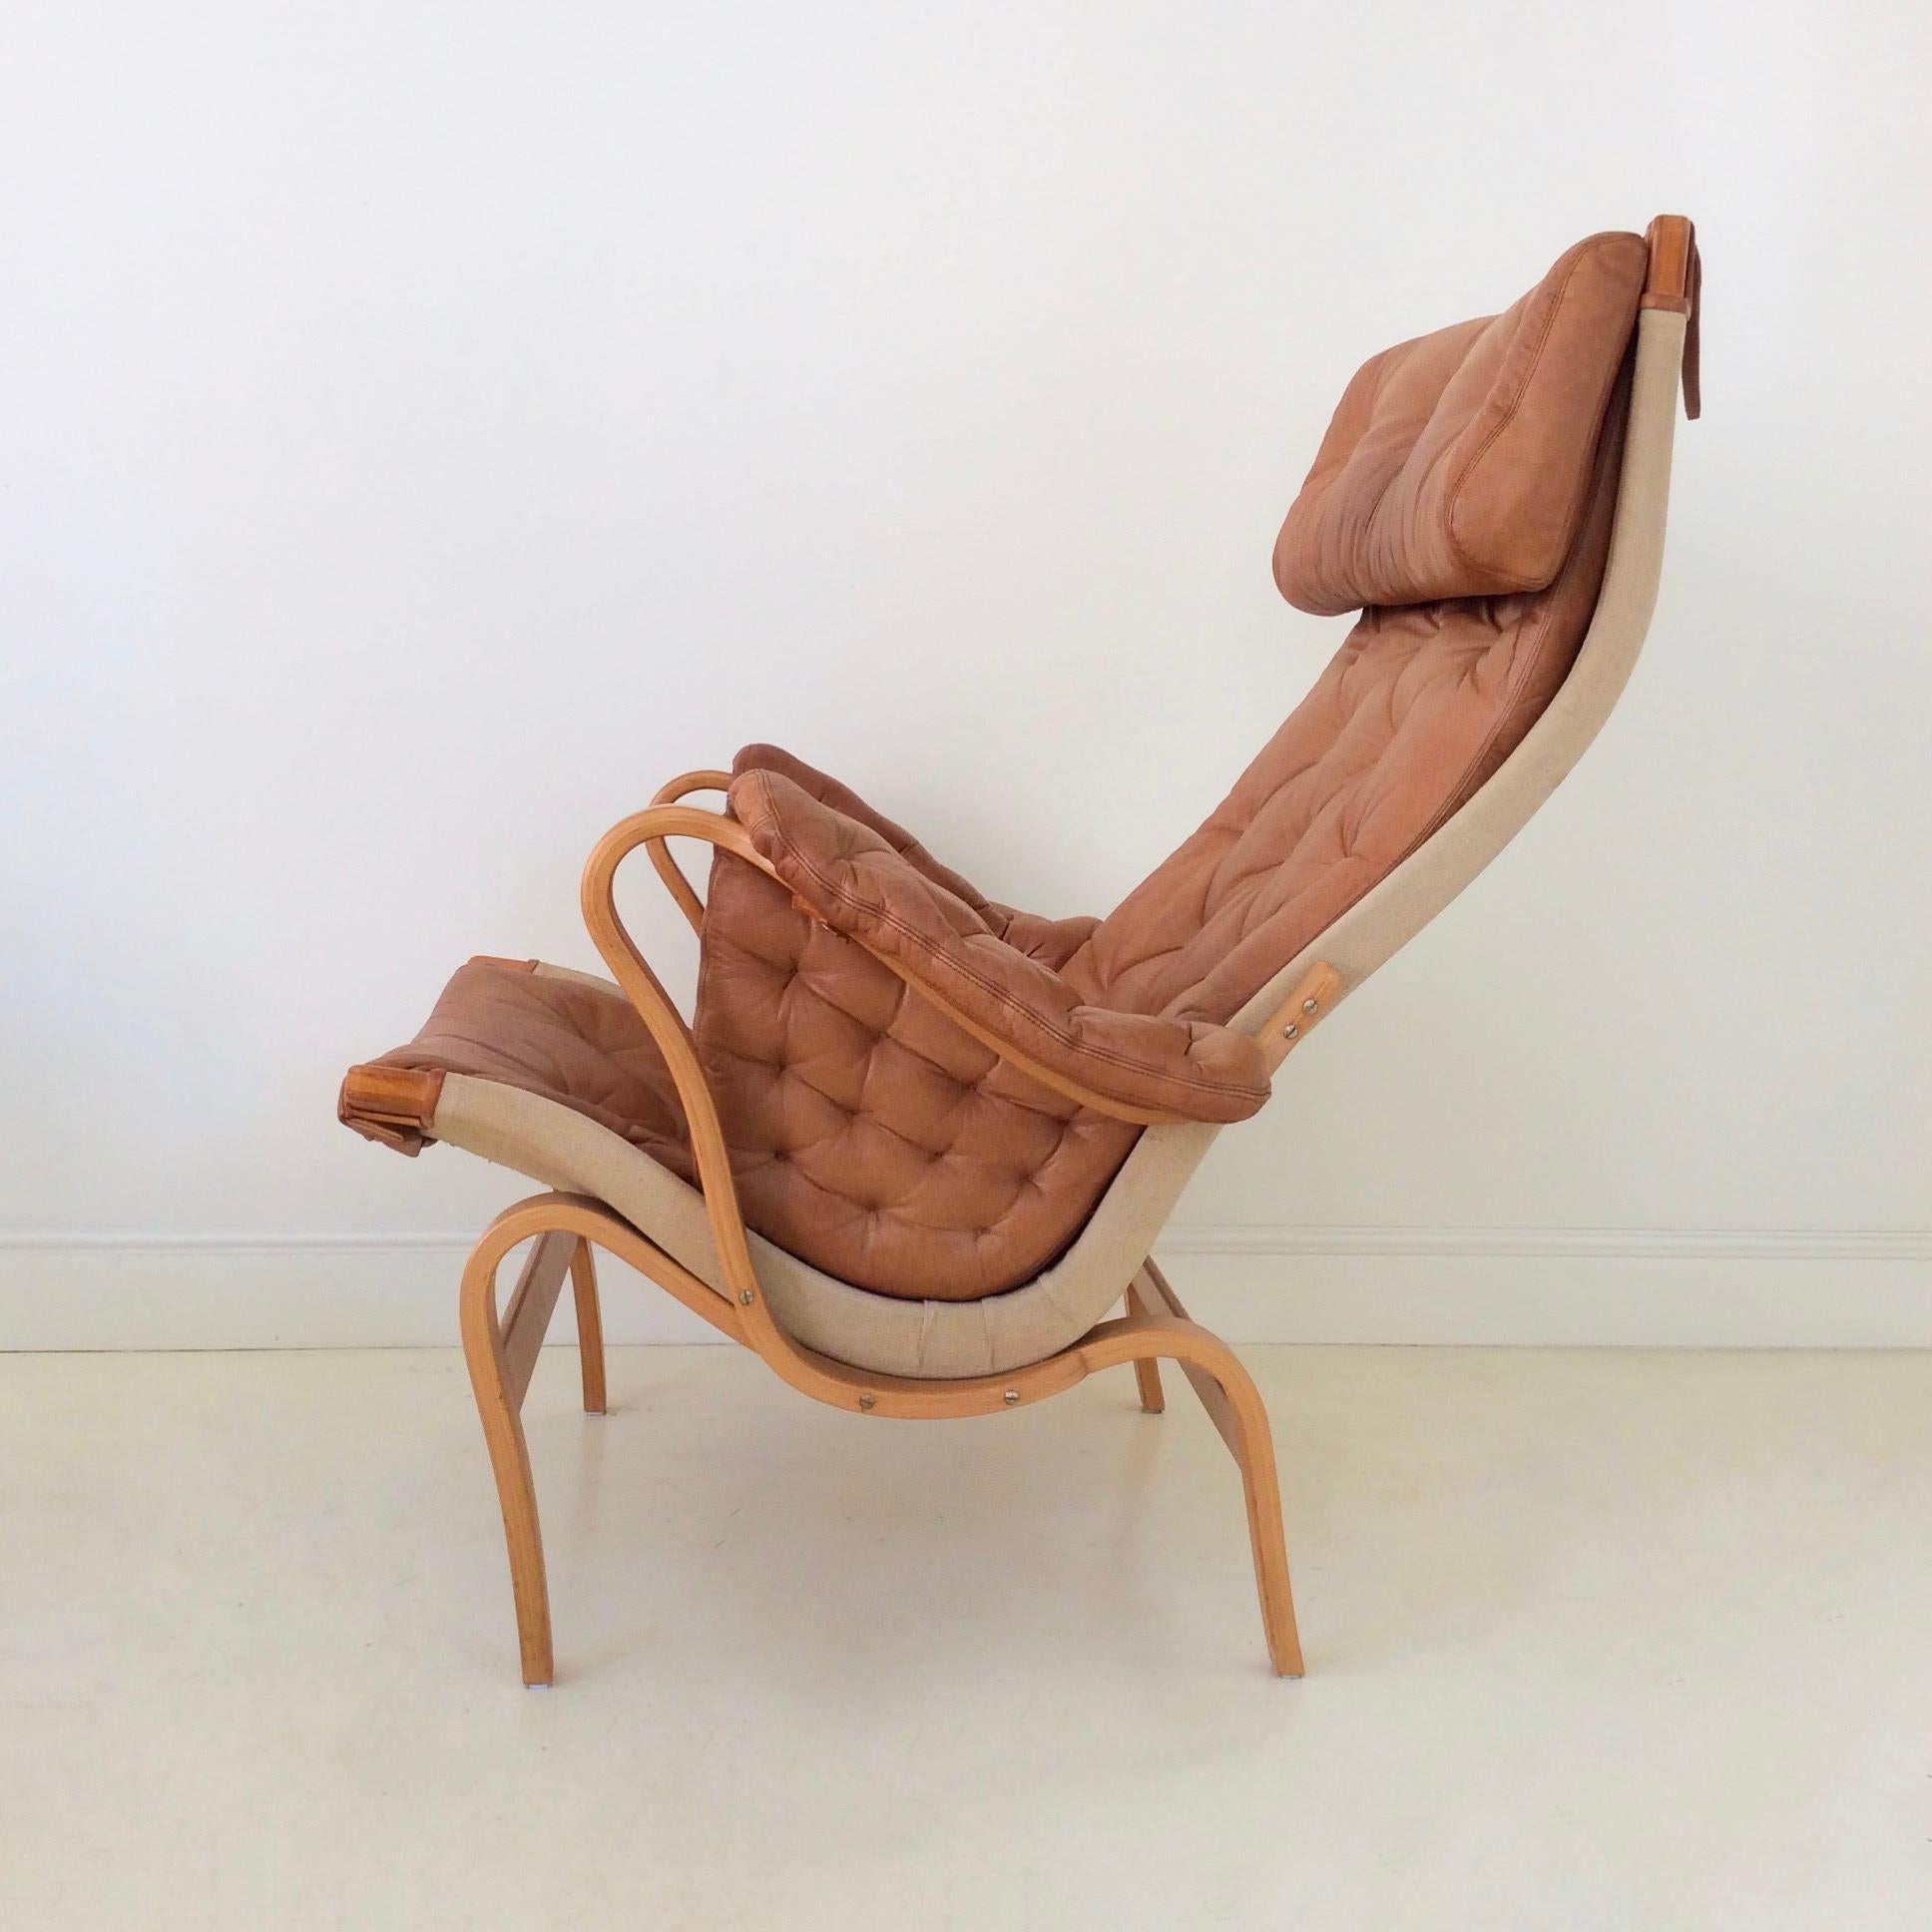 Nice pair of Pernilla model armchairs by Bruno Mathsson, Sweden, circa 1970.
Cognac leather, curved beech and canvas.
Dimensions: 97 cm H, 85 cm W, 90 cm D, seat height 40 cm.
Good original condition.
 